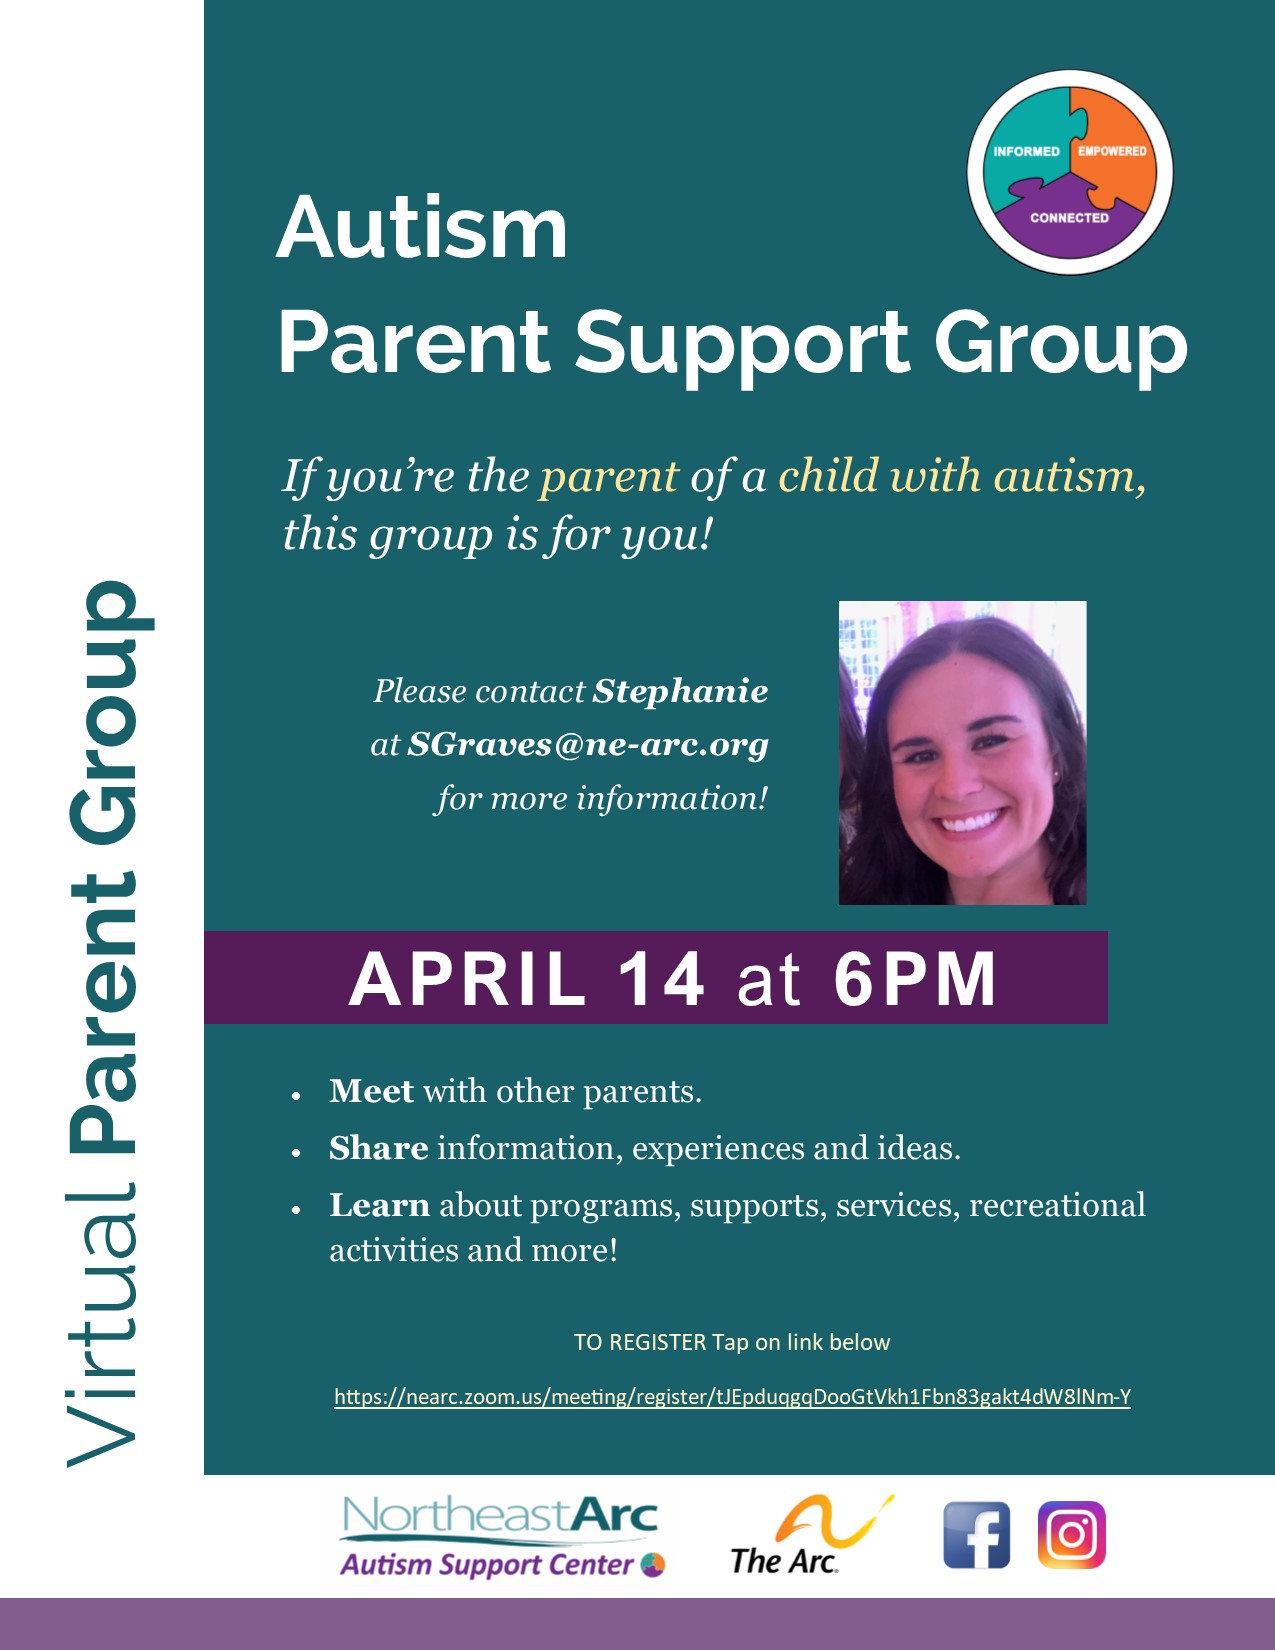 Flyer for an Autism Support Center Parent Support Group facilitated by Stephanie Graves on April 14 at 6PM.